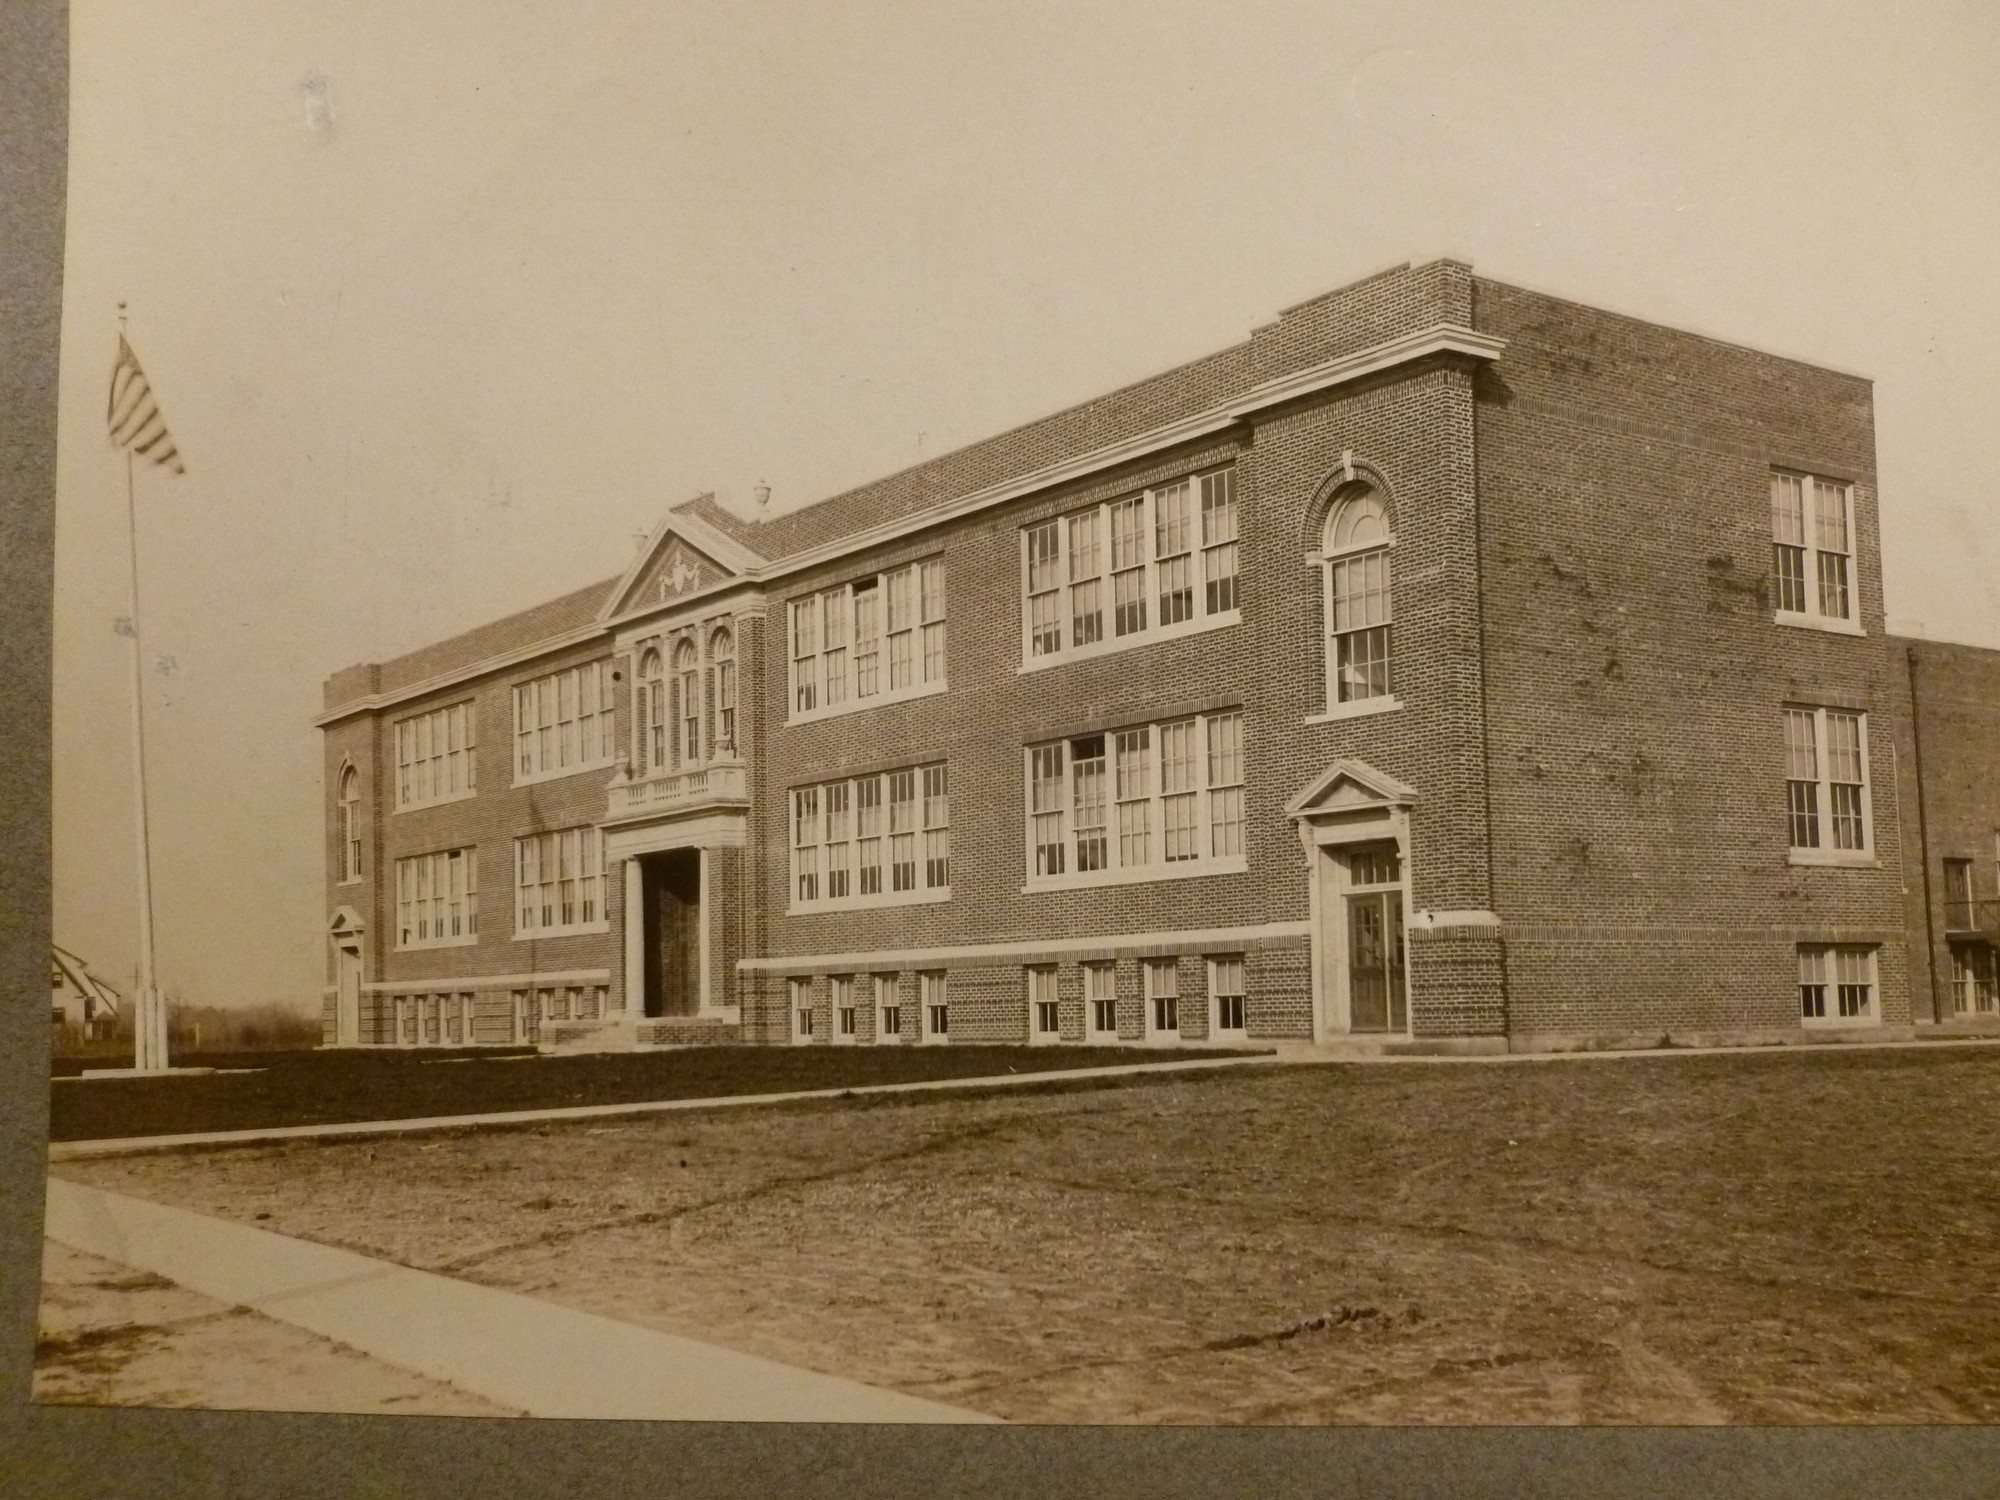 The school when it was first built in 1929.